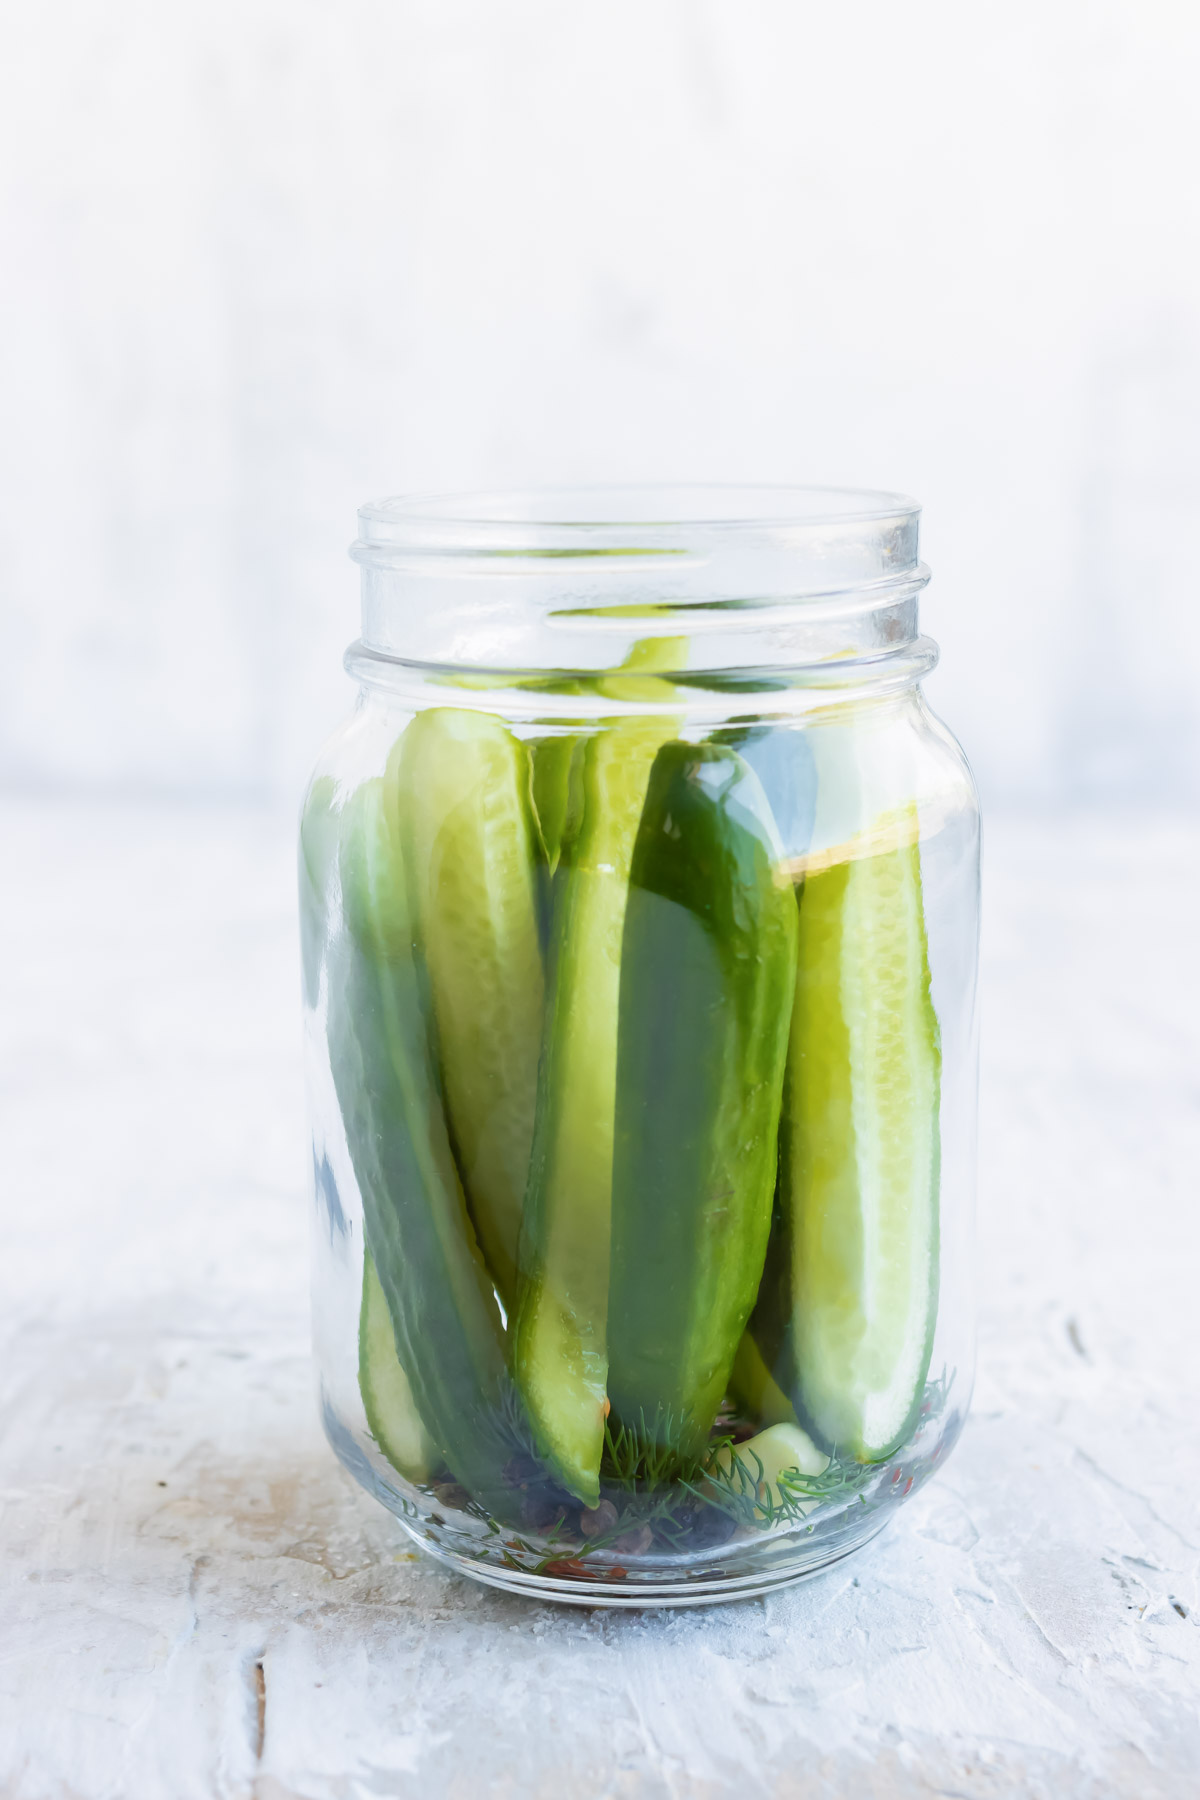 Sliced cucumbers are added to a jar with spices.